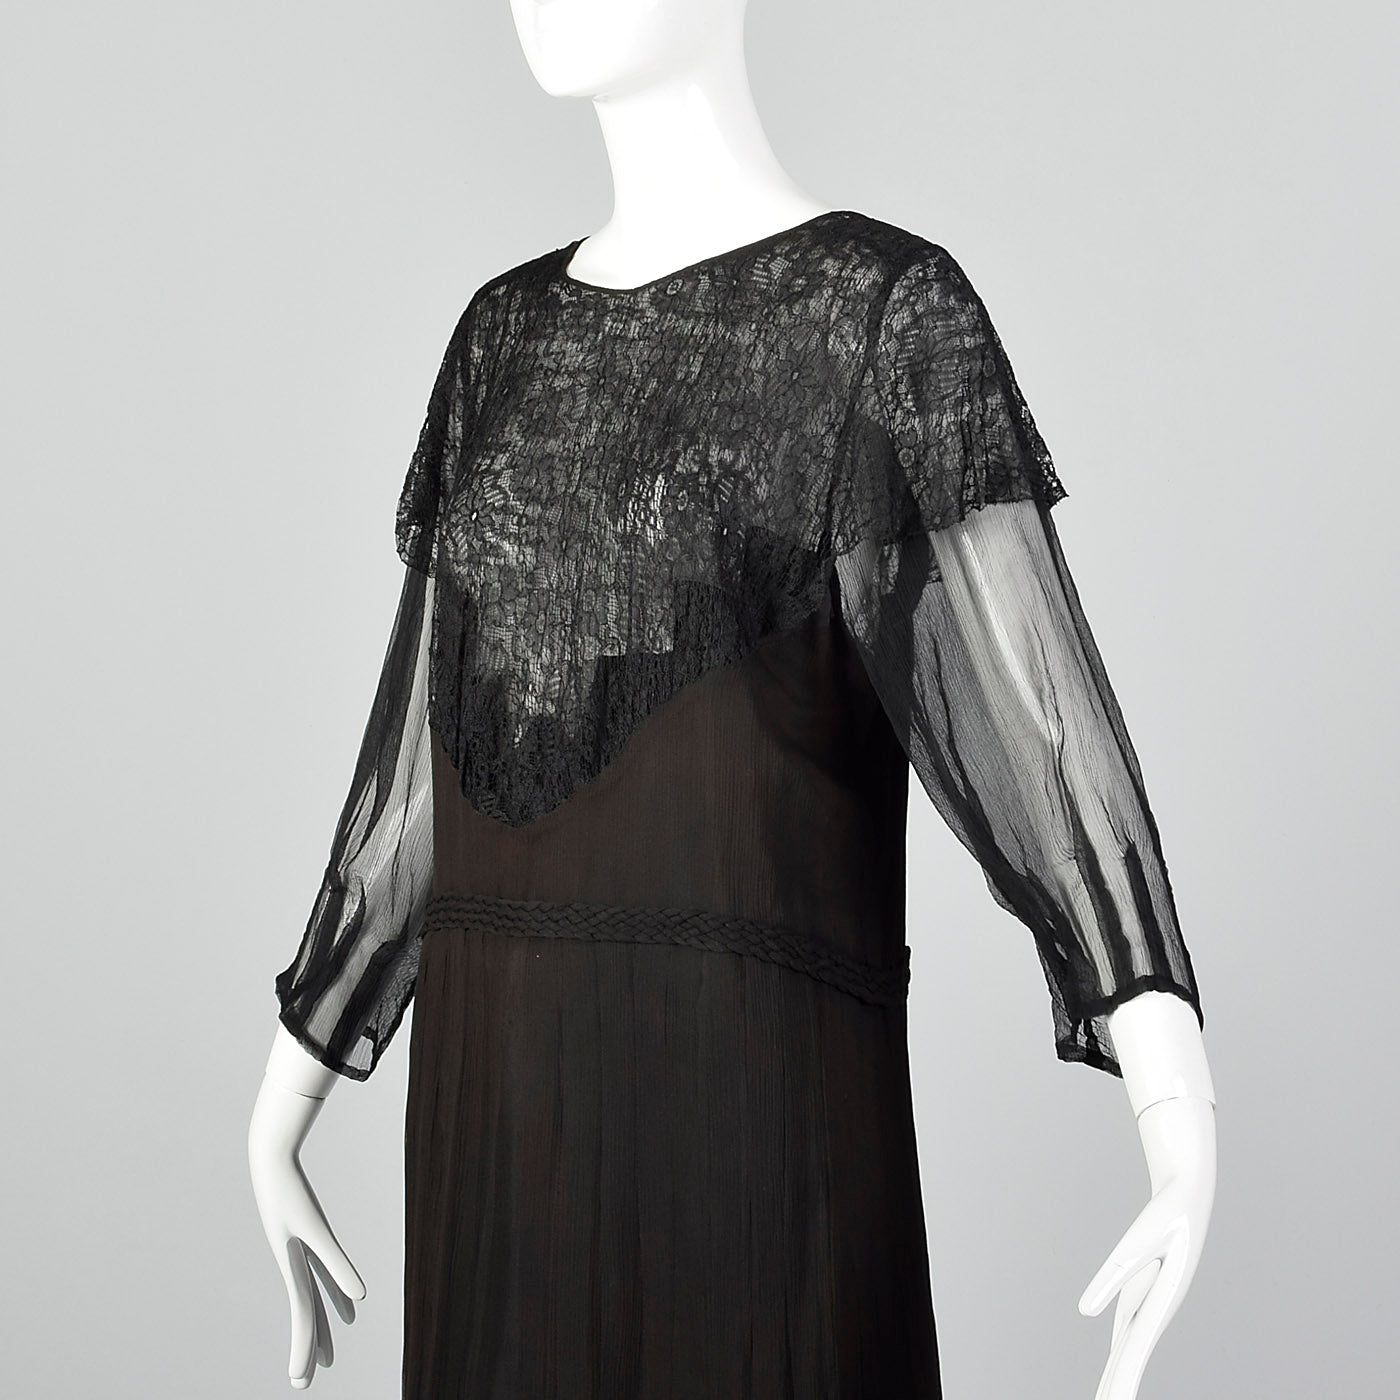 1930s Black Silk Dress with Sheer Lace Bust Panel